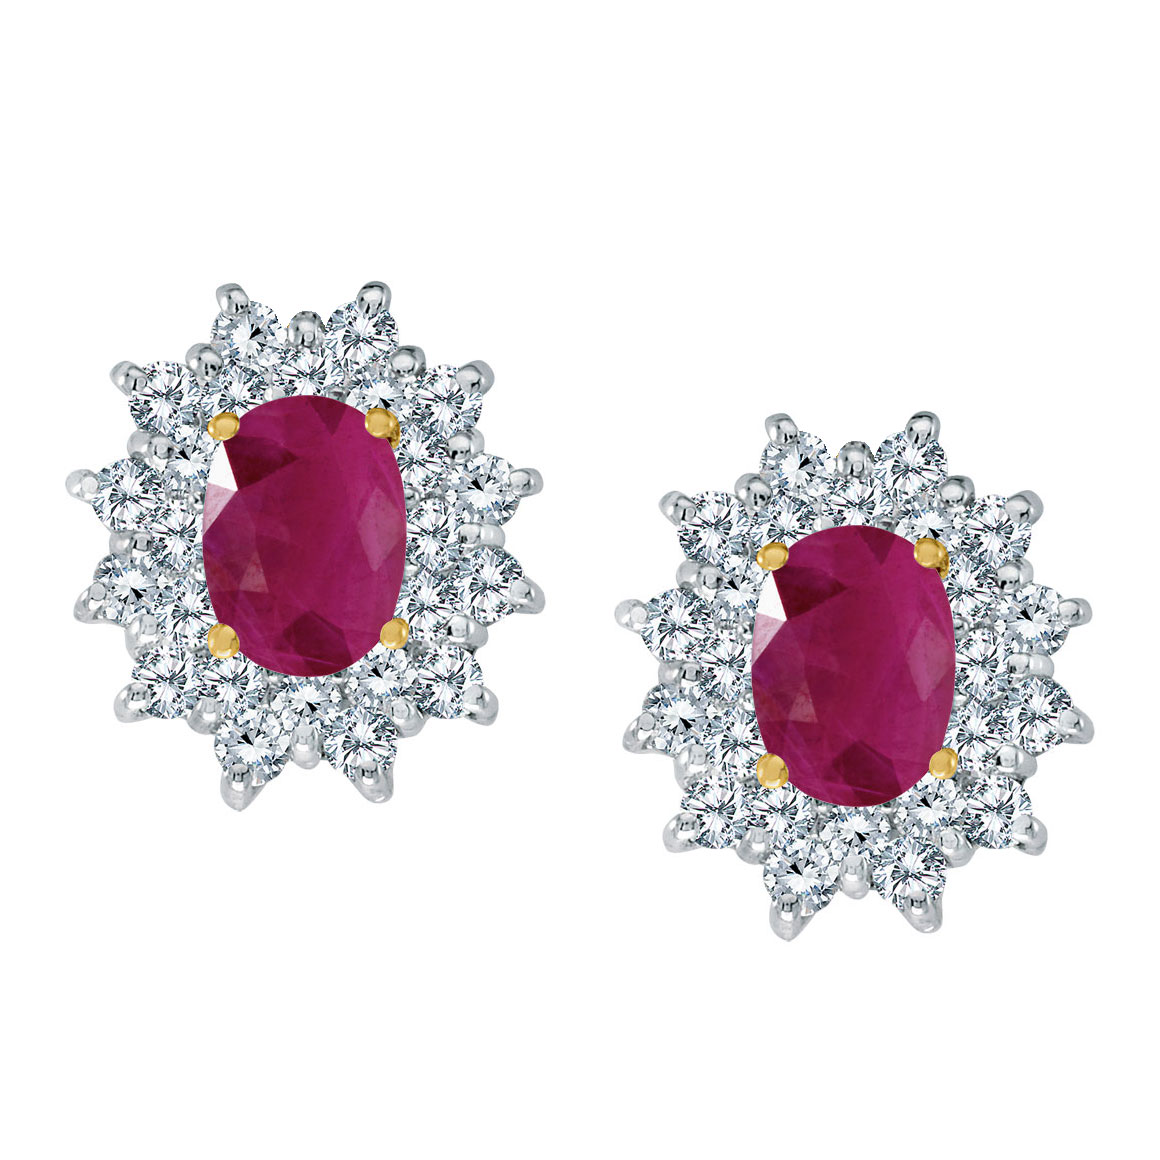 JCX2285: Bright 14k yellow gold earrings featuring 7x5 mm rubies surrounded by 1.00 total carat of scintillating diamonds.